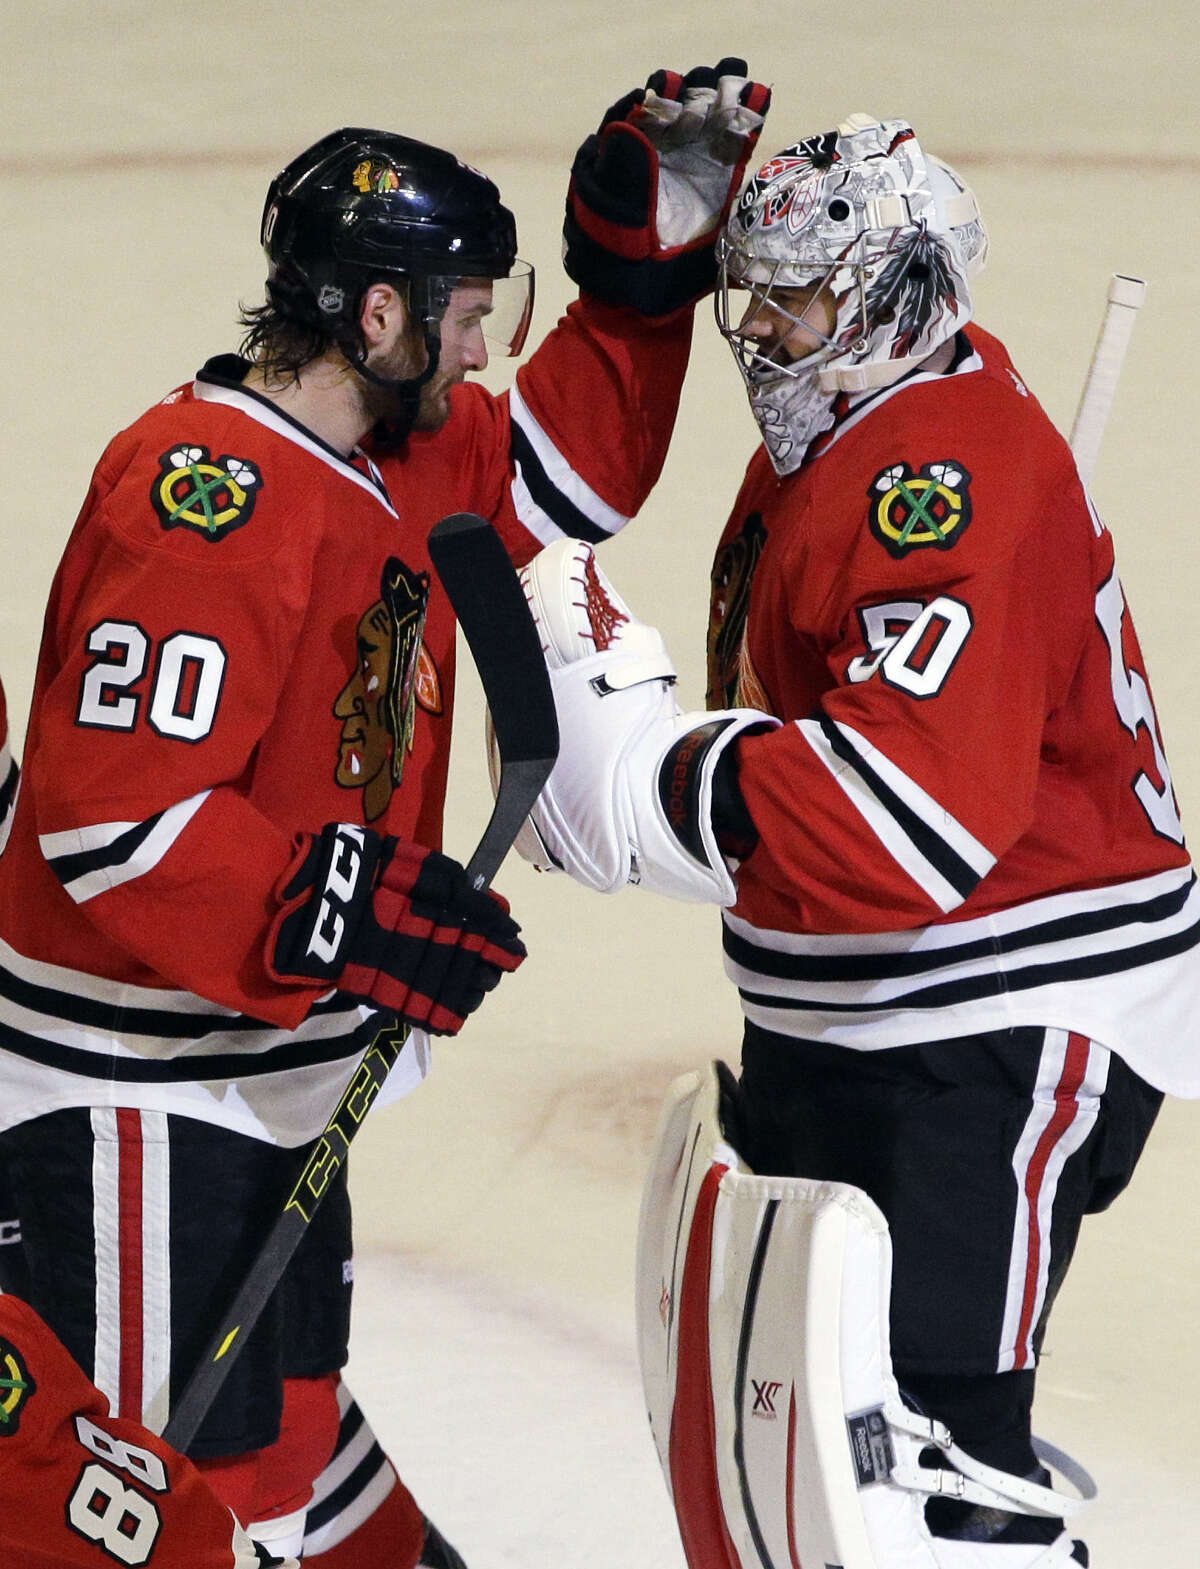 Chicago's Brandon Saad (left), who scored two goals, and Corey Crawford, who made 18 saves, enjoy their Game 2 win.